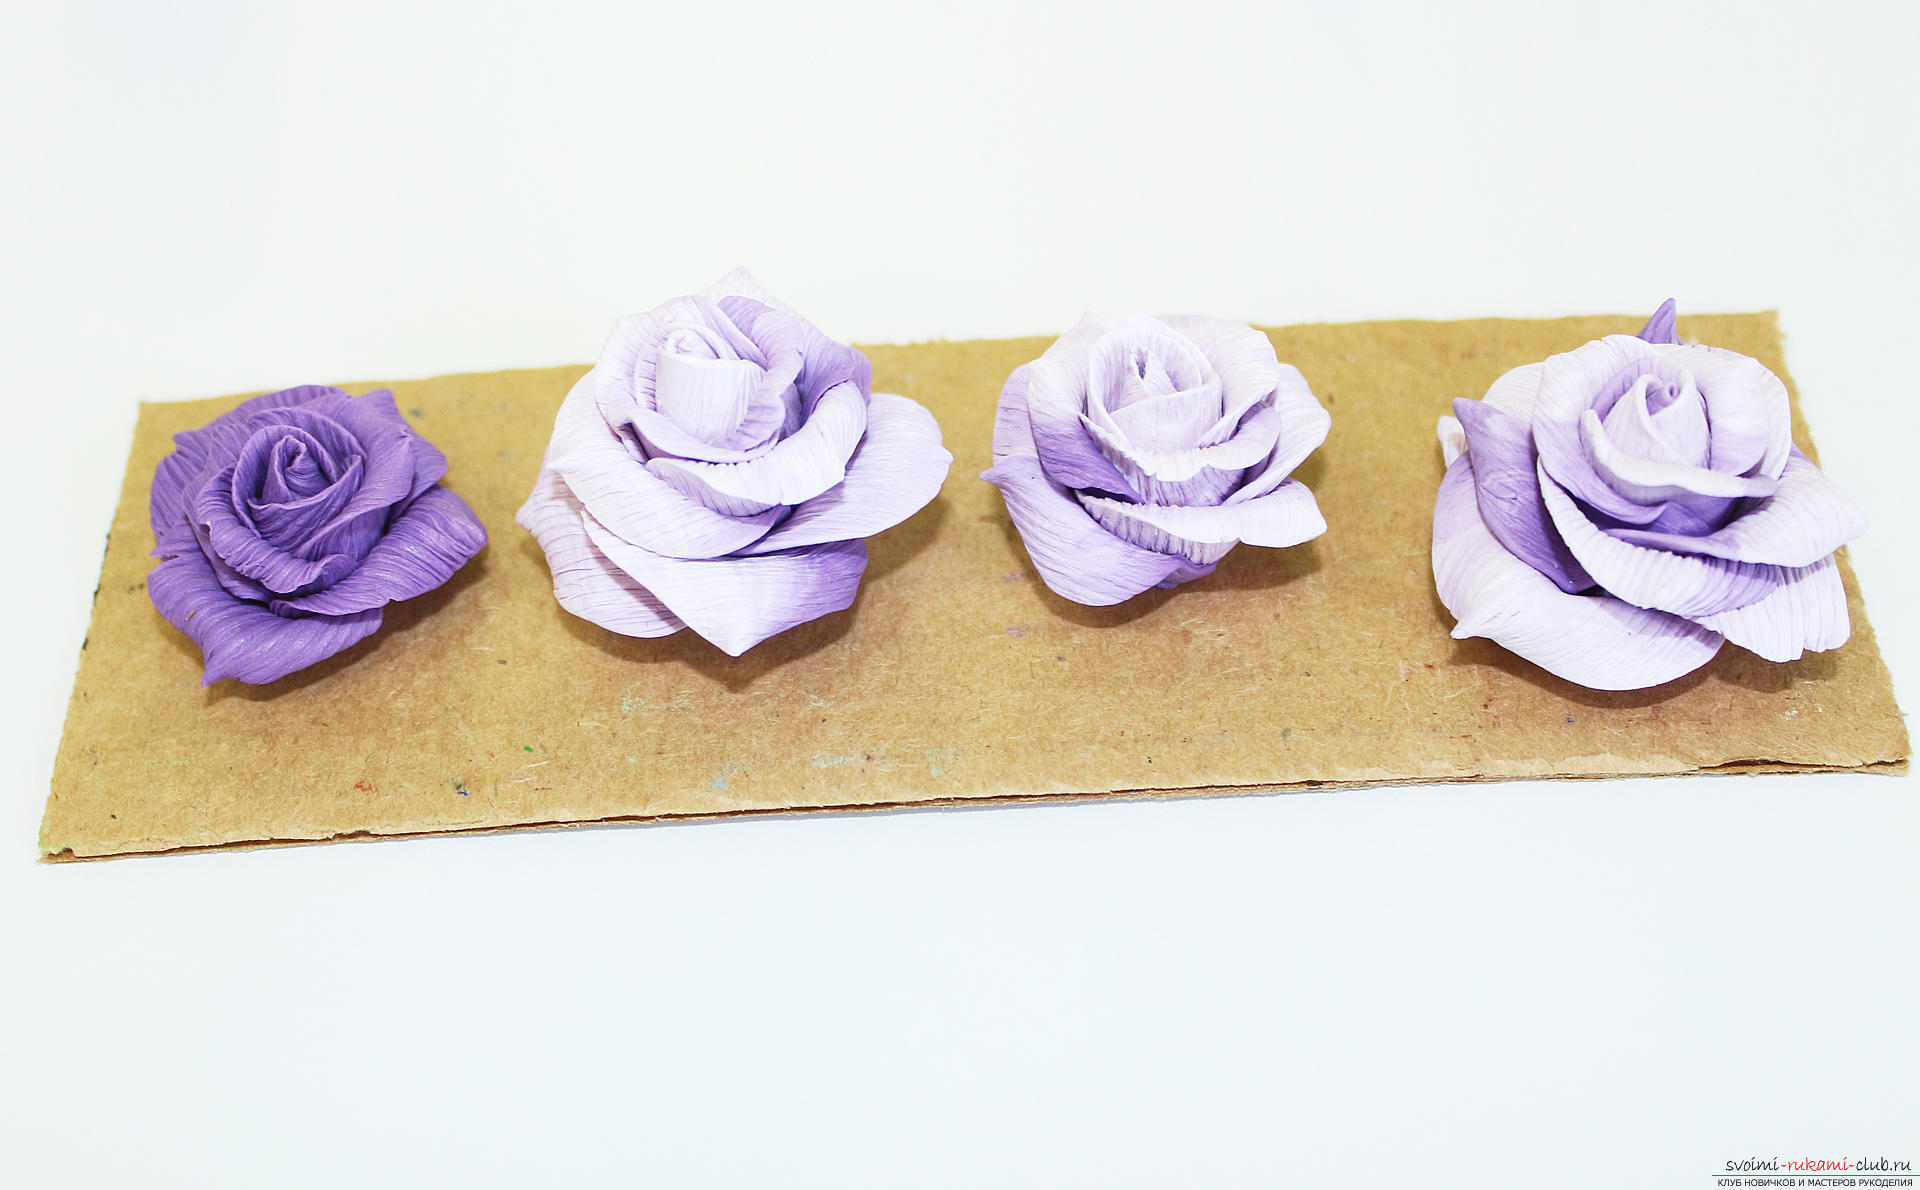 This master class with a photo and description will teach you how to make flowers - roses - from polymer clay in texturing technology. Picture # 40